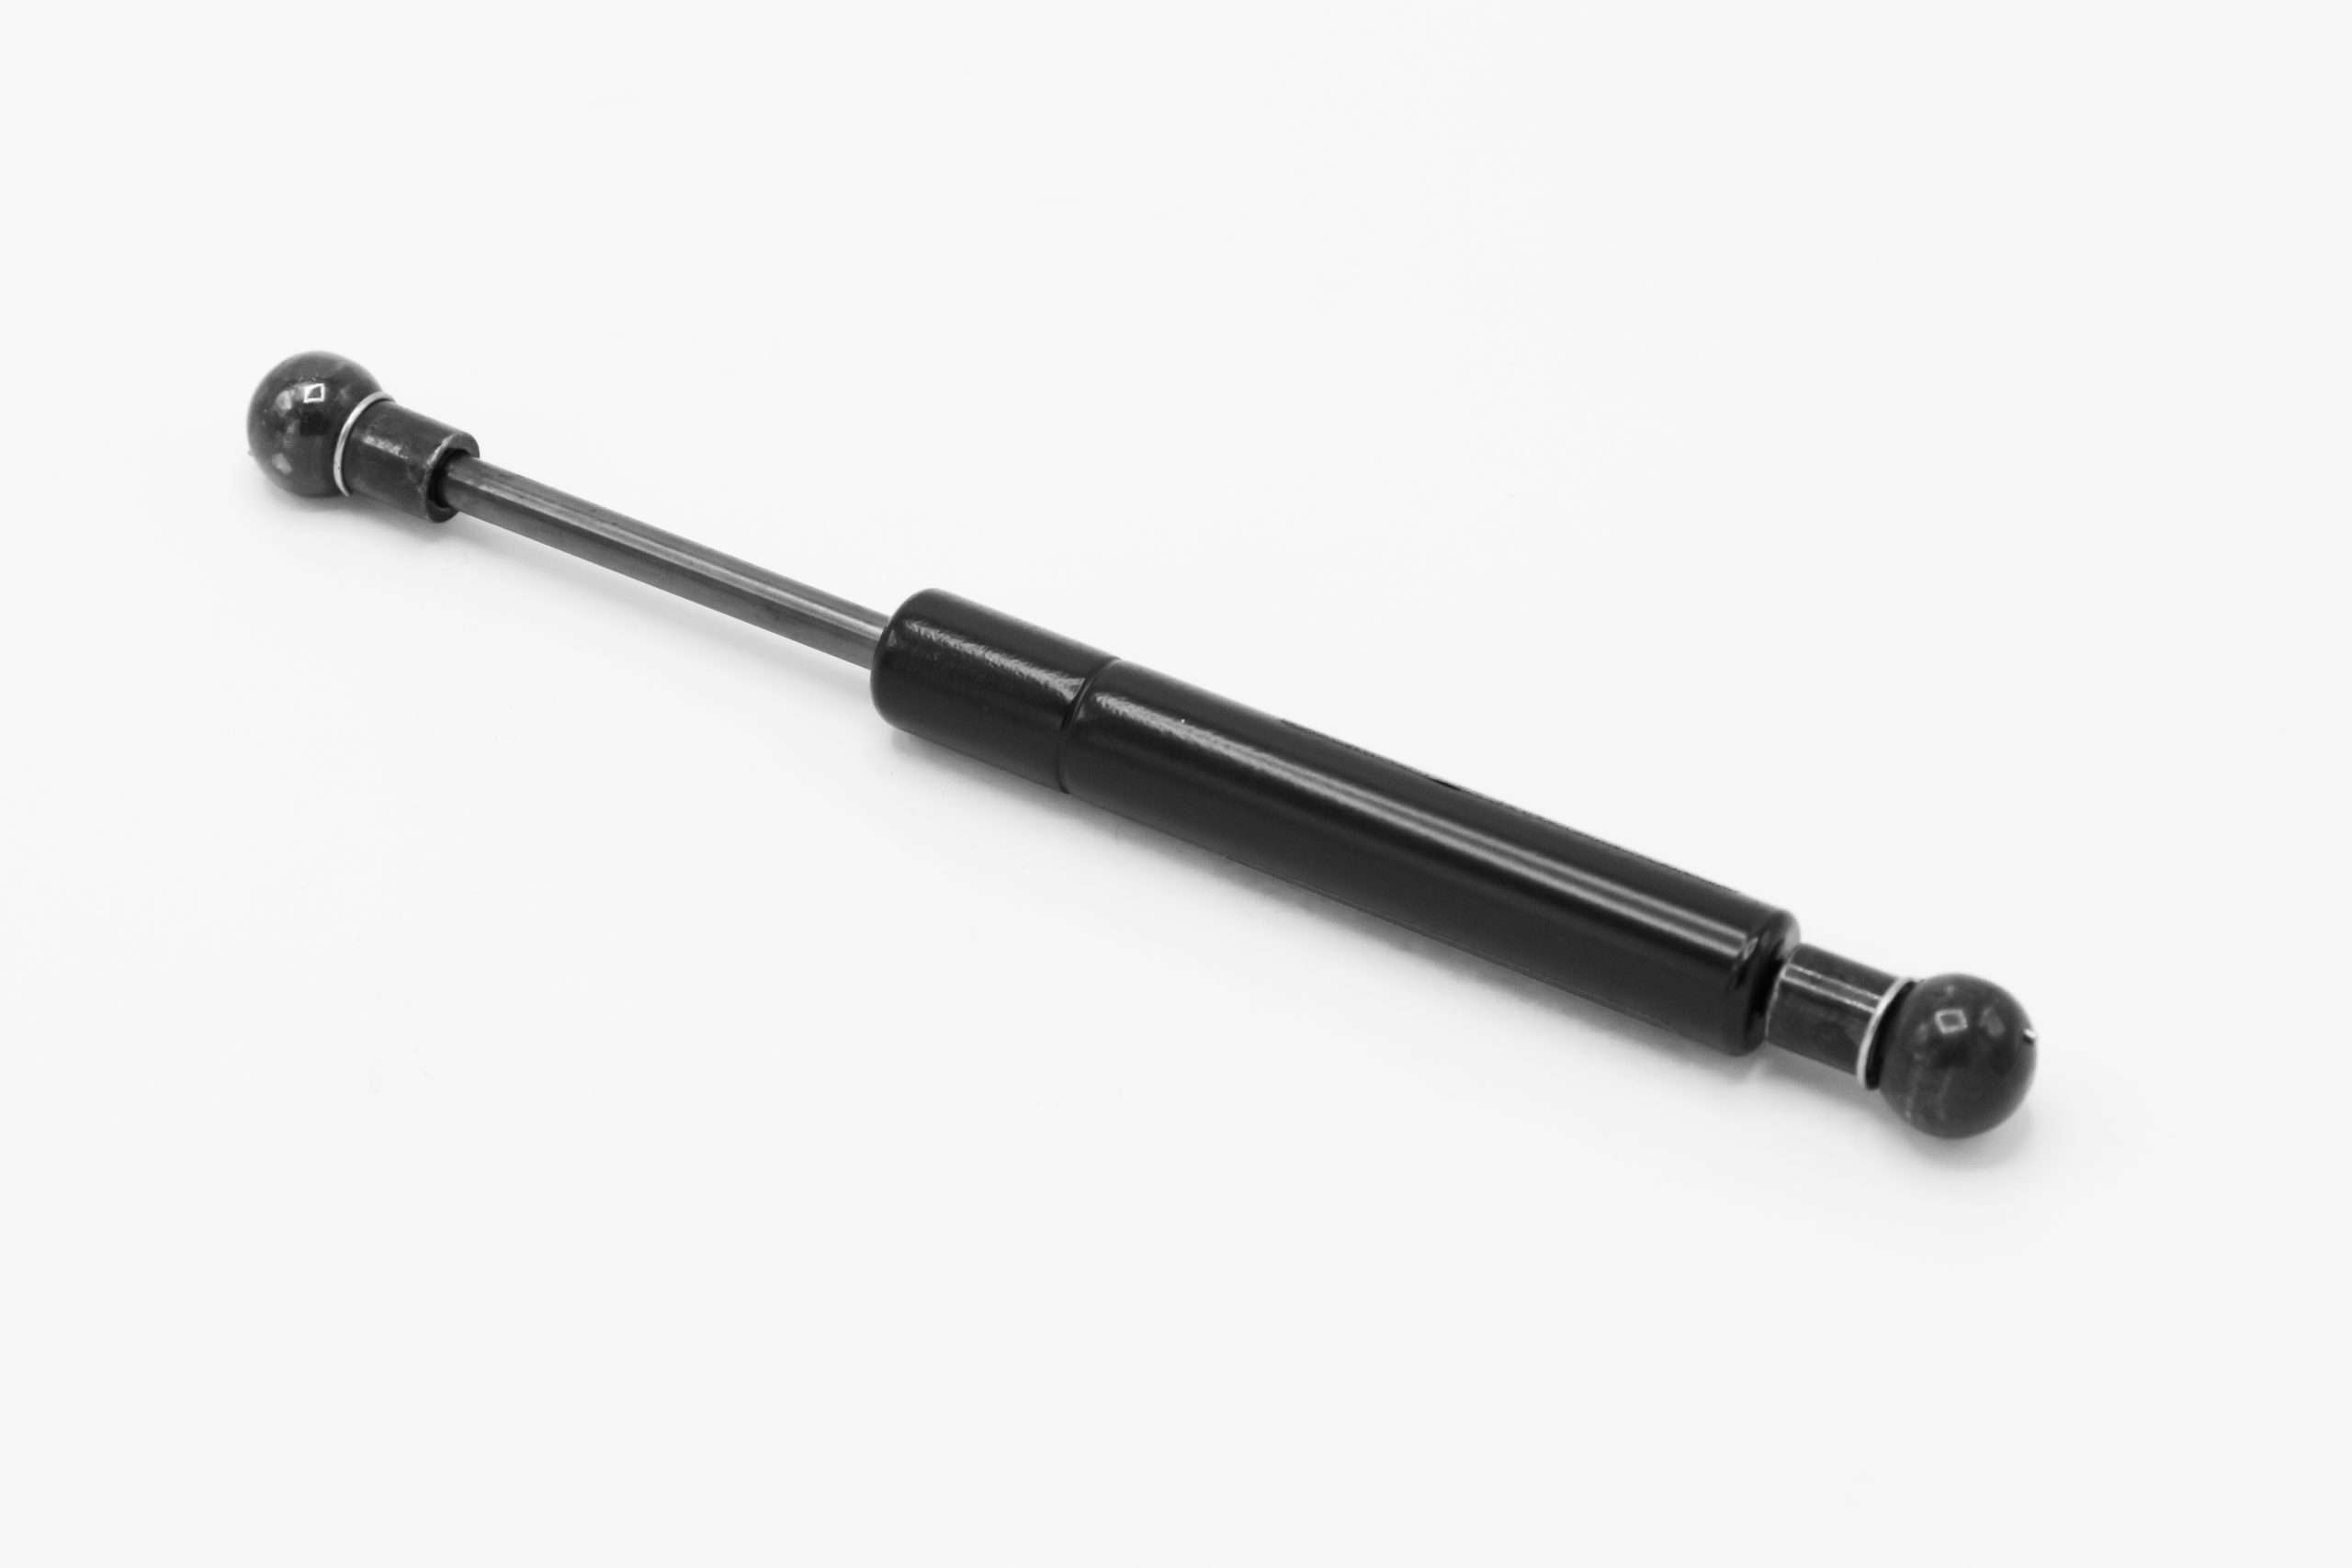 6mm rod diameter with metal end fittings with 2" stroke, 7.52" overall length and force of 30 pounds